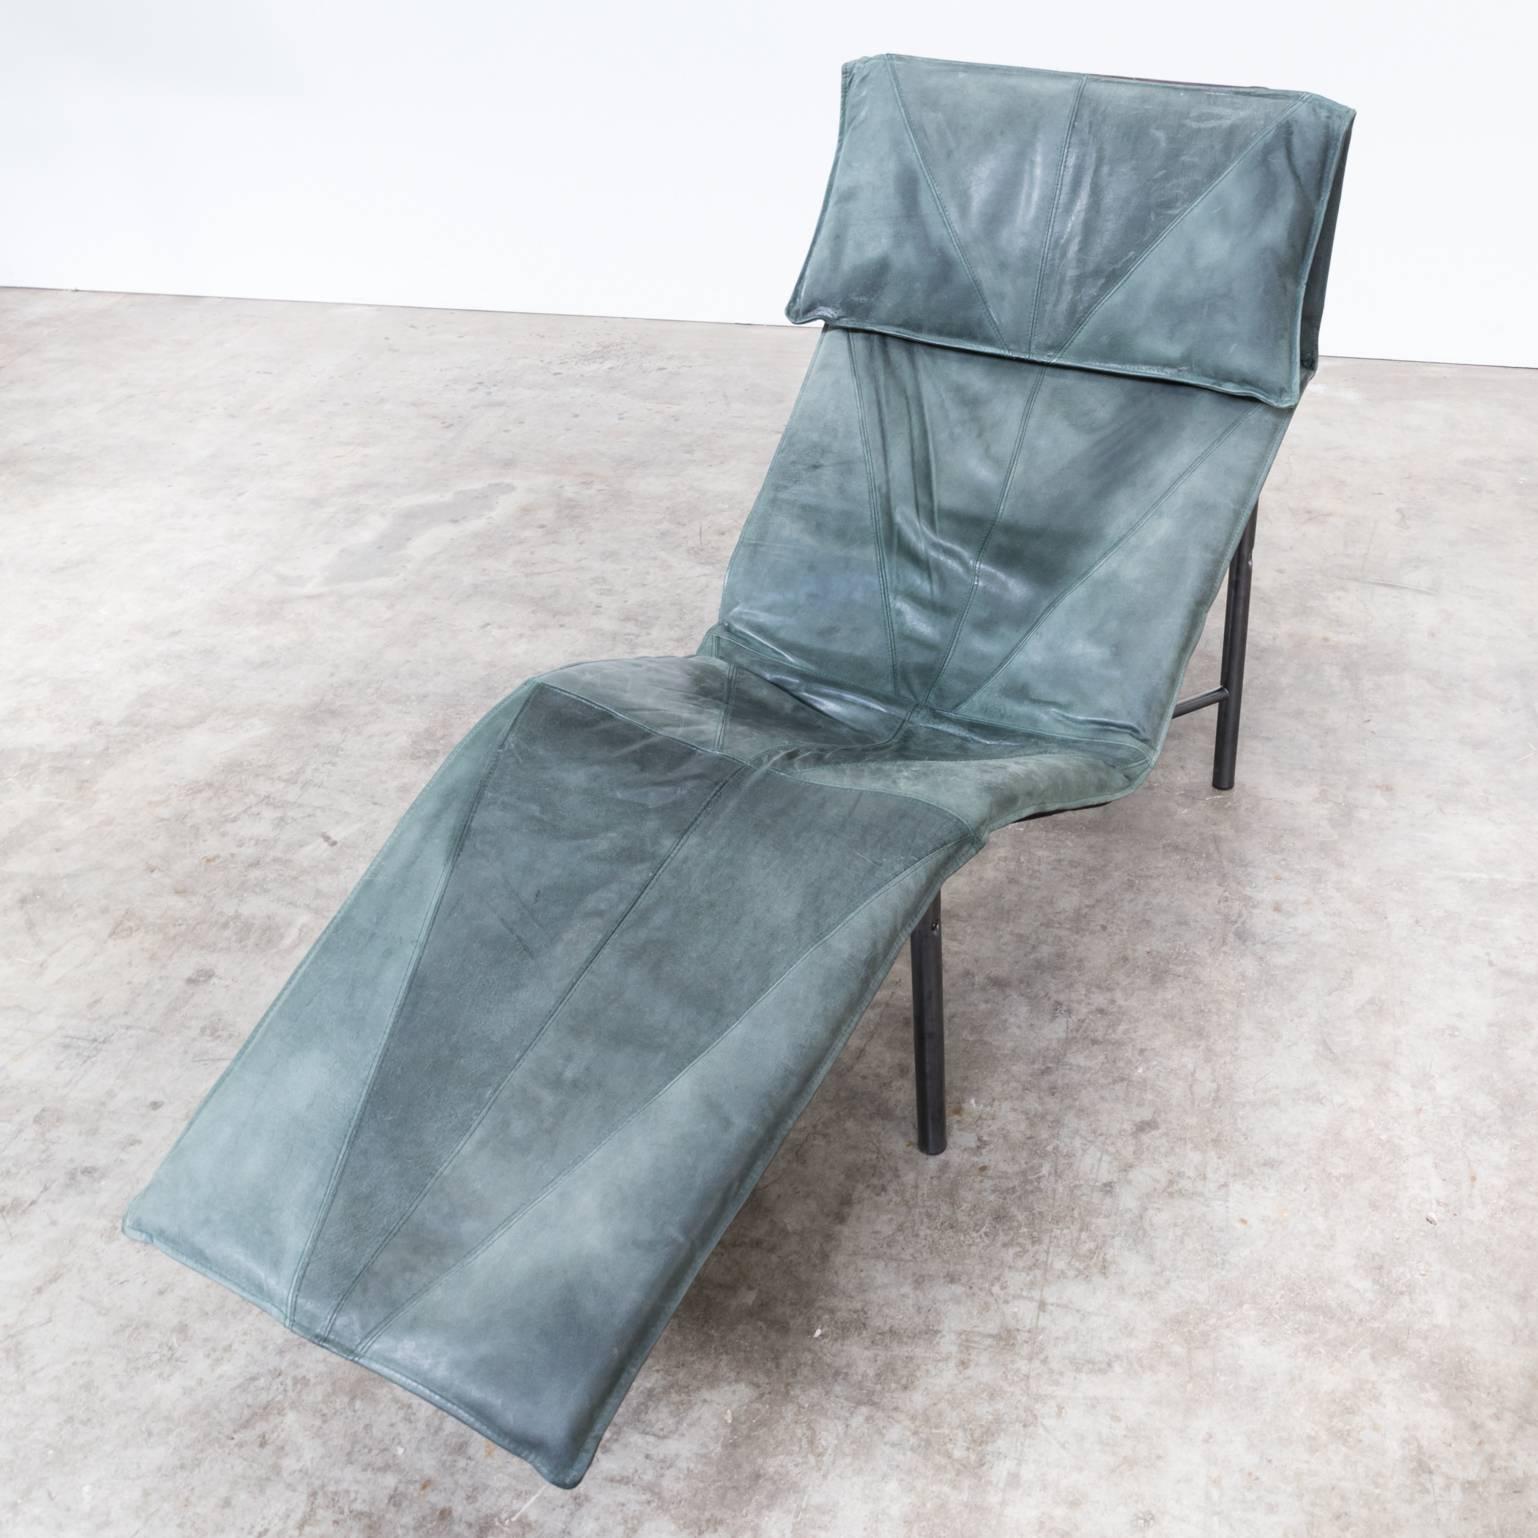 1980s Tord Björklund ‘Skye’ Chaise Longue Chair Leather In Good Condition For Sale In Amstelveen, Noord